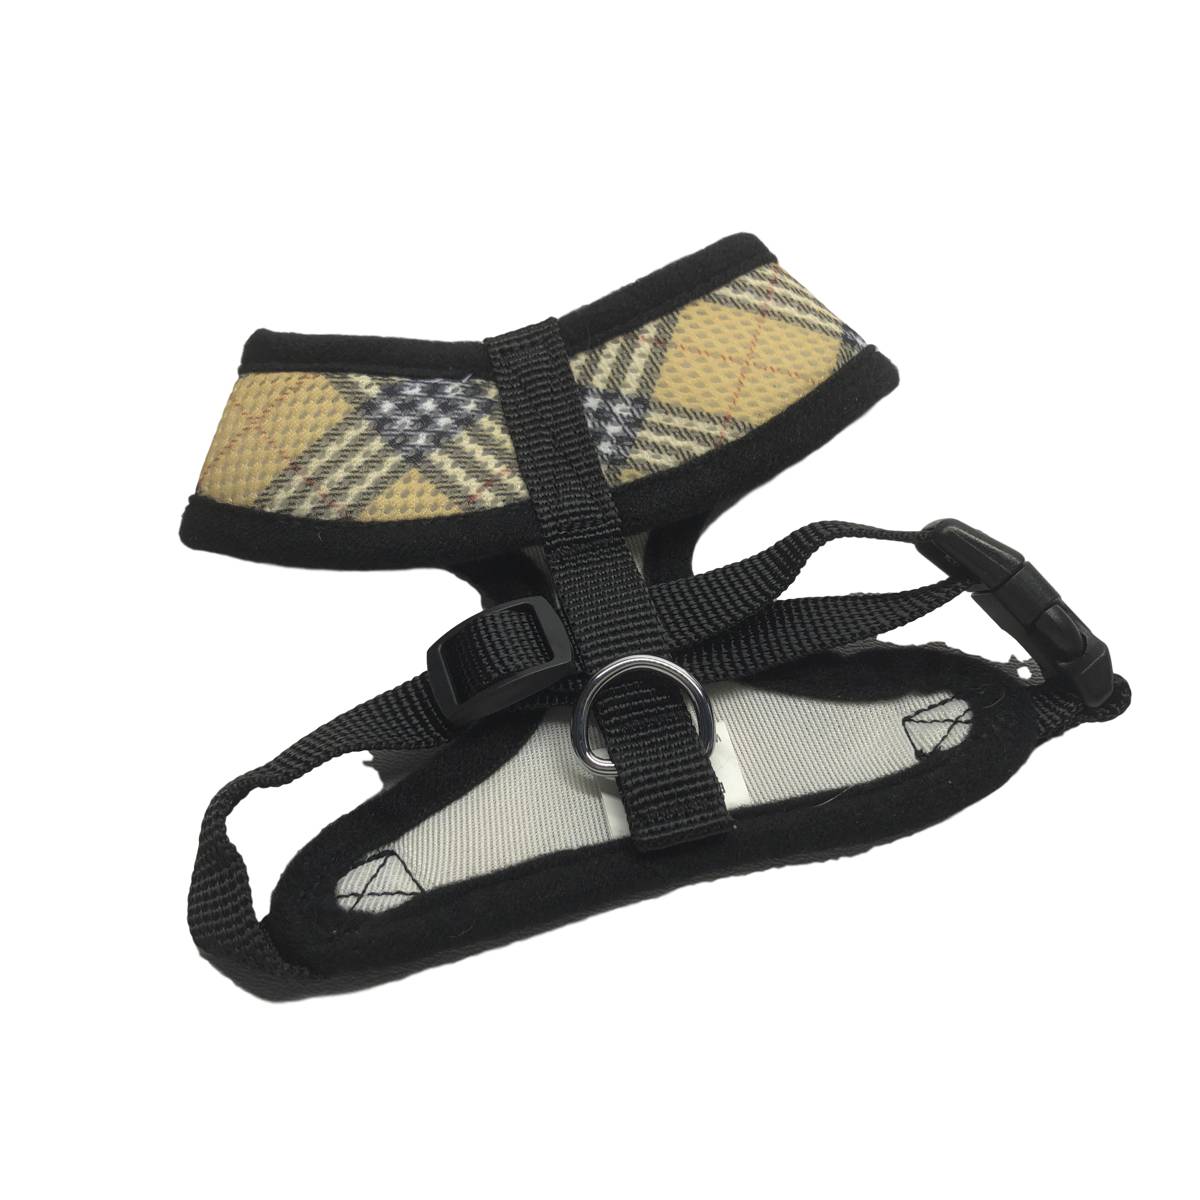 Plaid Breathe EZ Pullover Mesh Dog Harness in Tan | Pawlicious & Company